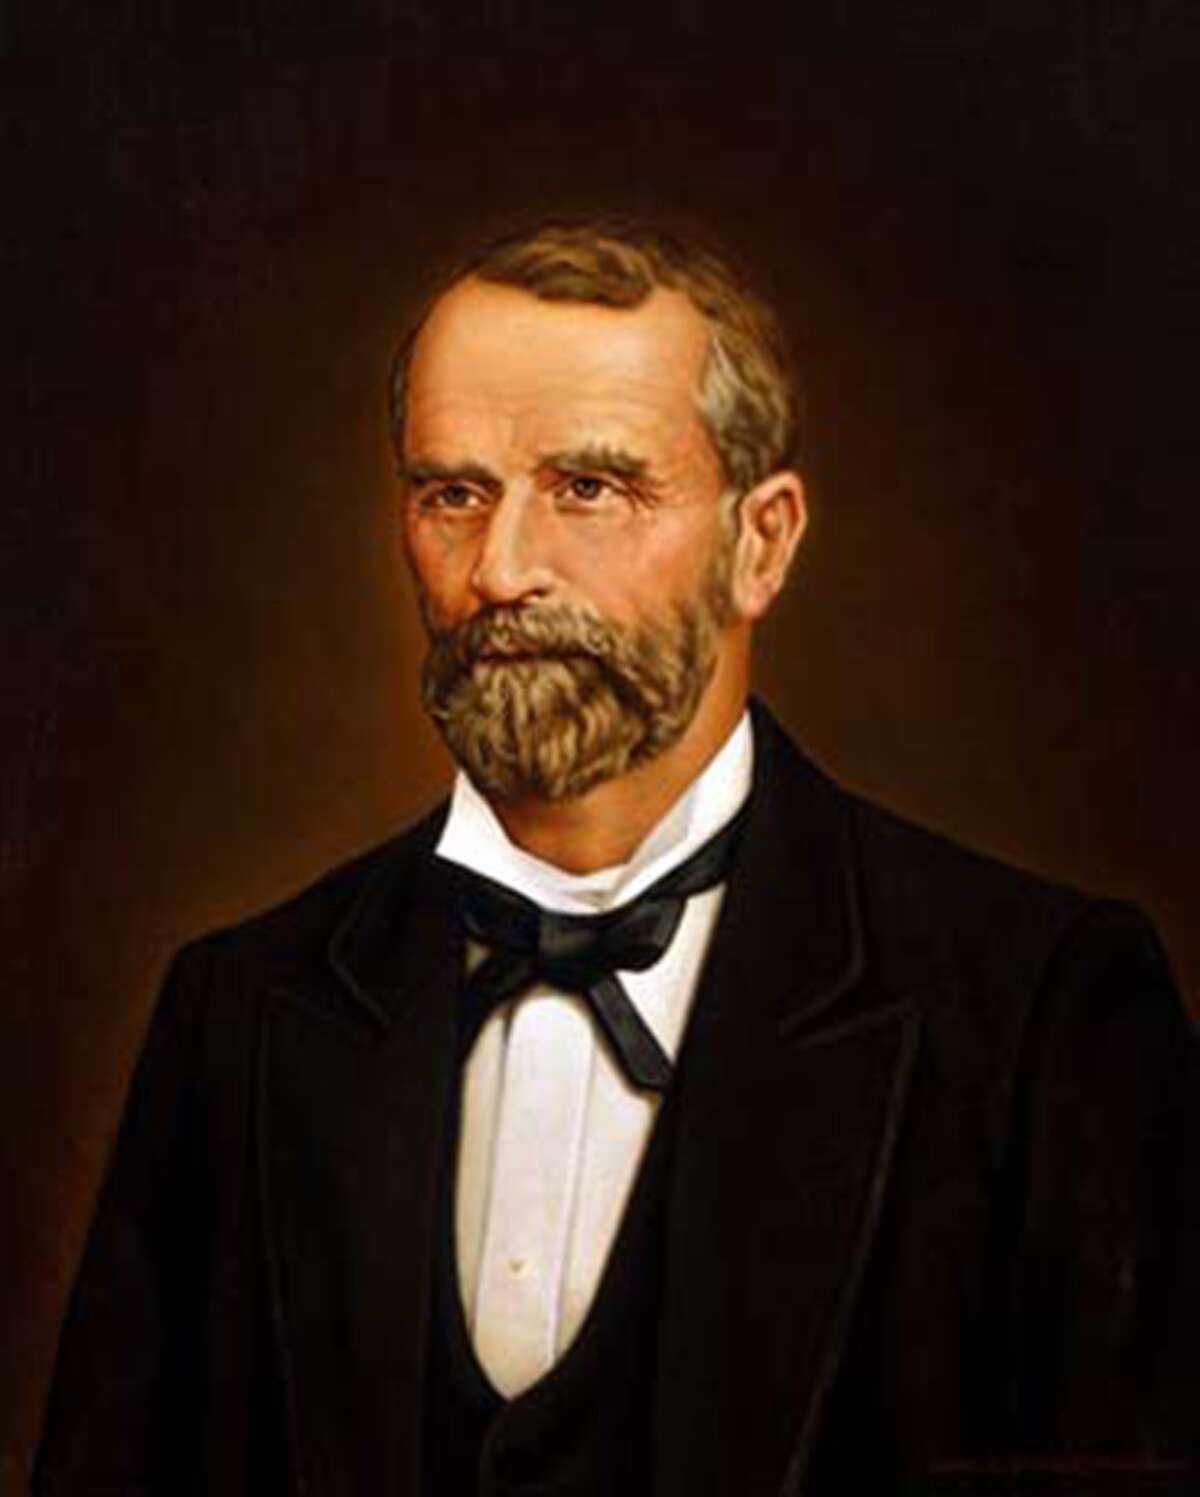 Fletcher S. Stockdale was acting Texas governor from June 17, 1865 to July 21, 1865.